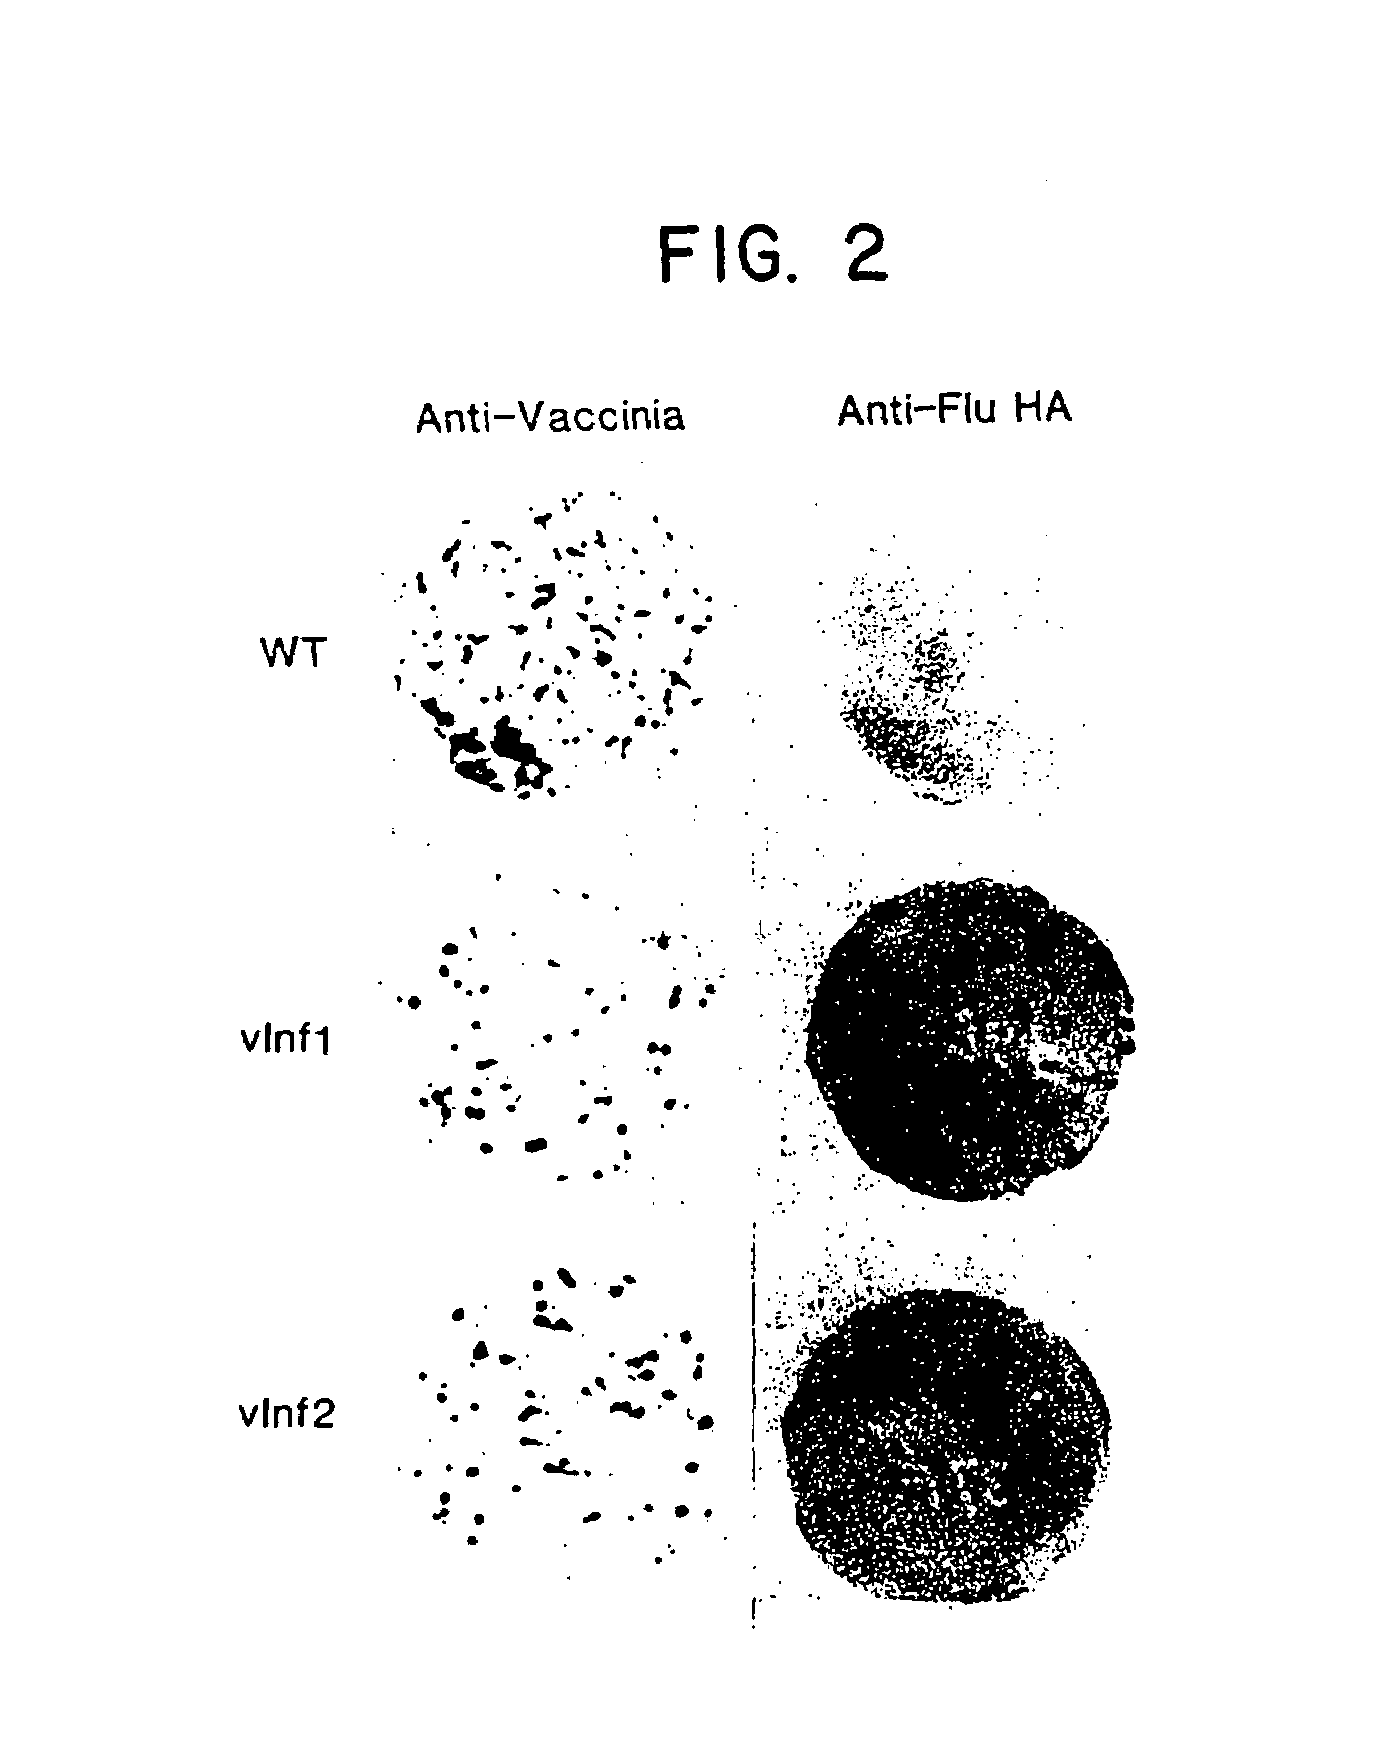 Compositions containing recombinant poxviruses having foreign DNA expressed under the control of poxvirus regulatory sequences